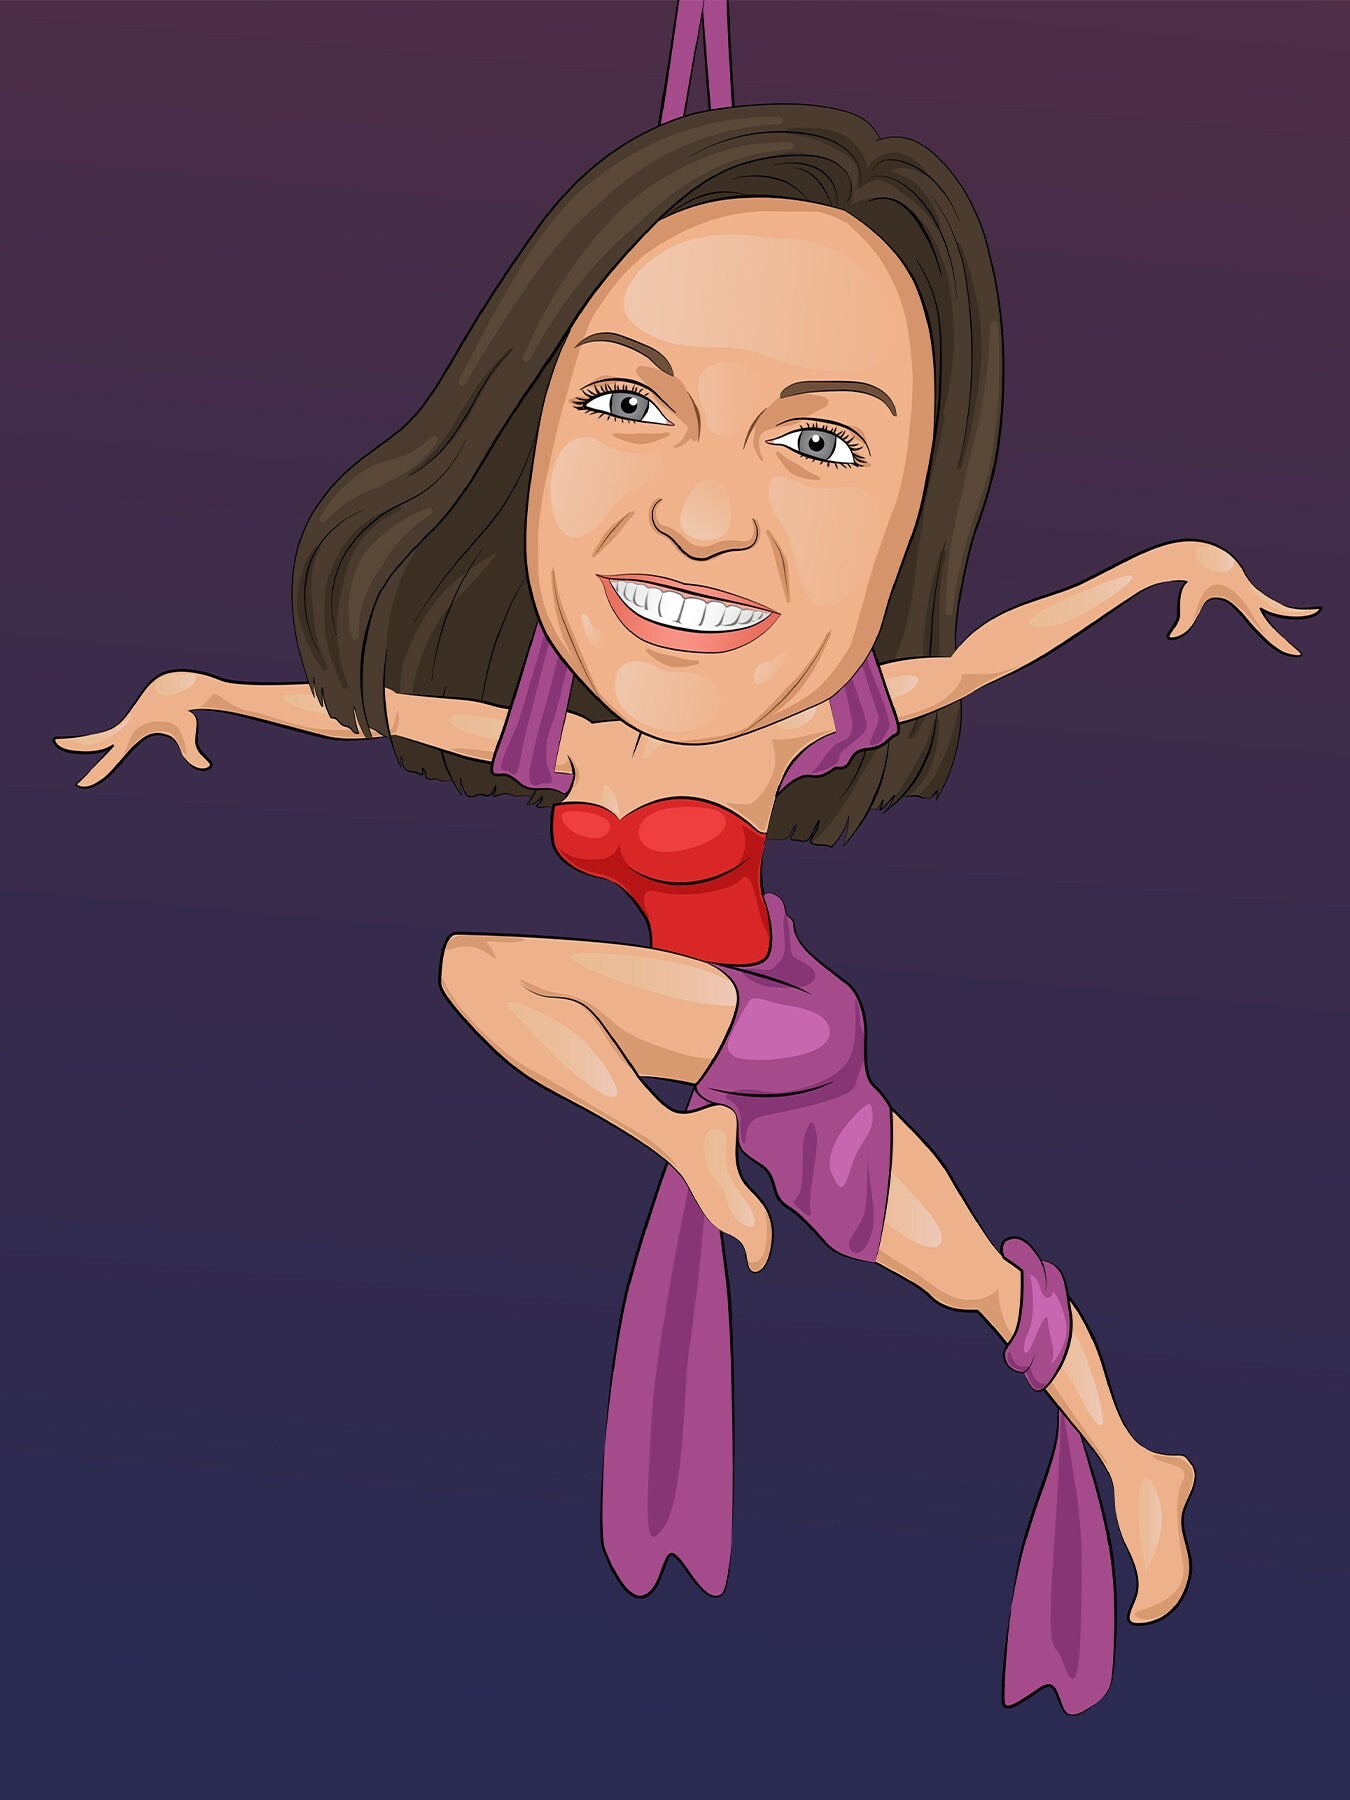 Belly Dancer Gift - Custom Caricature From Photo/Bellydance/Belly Dance art/Bellydancer gift